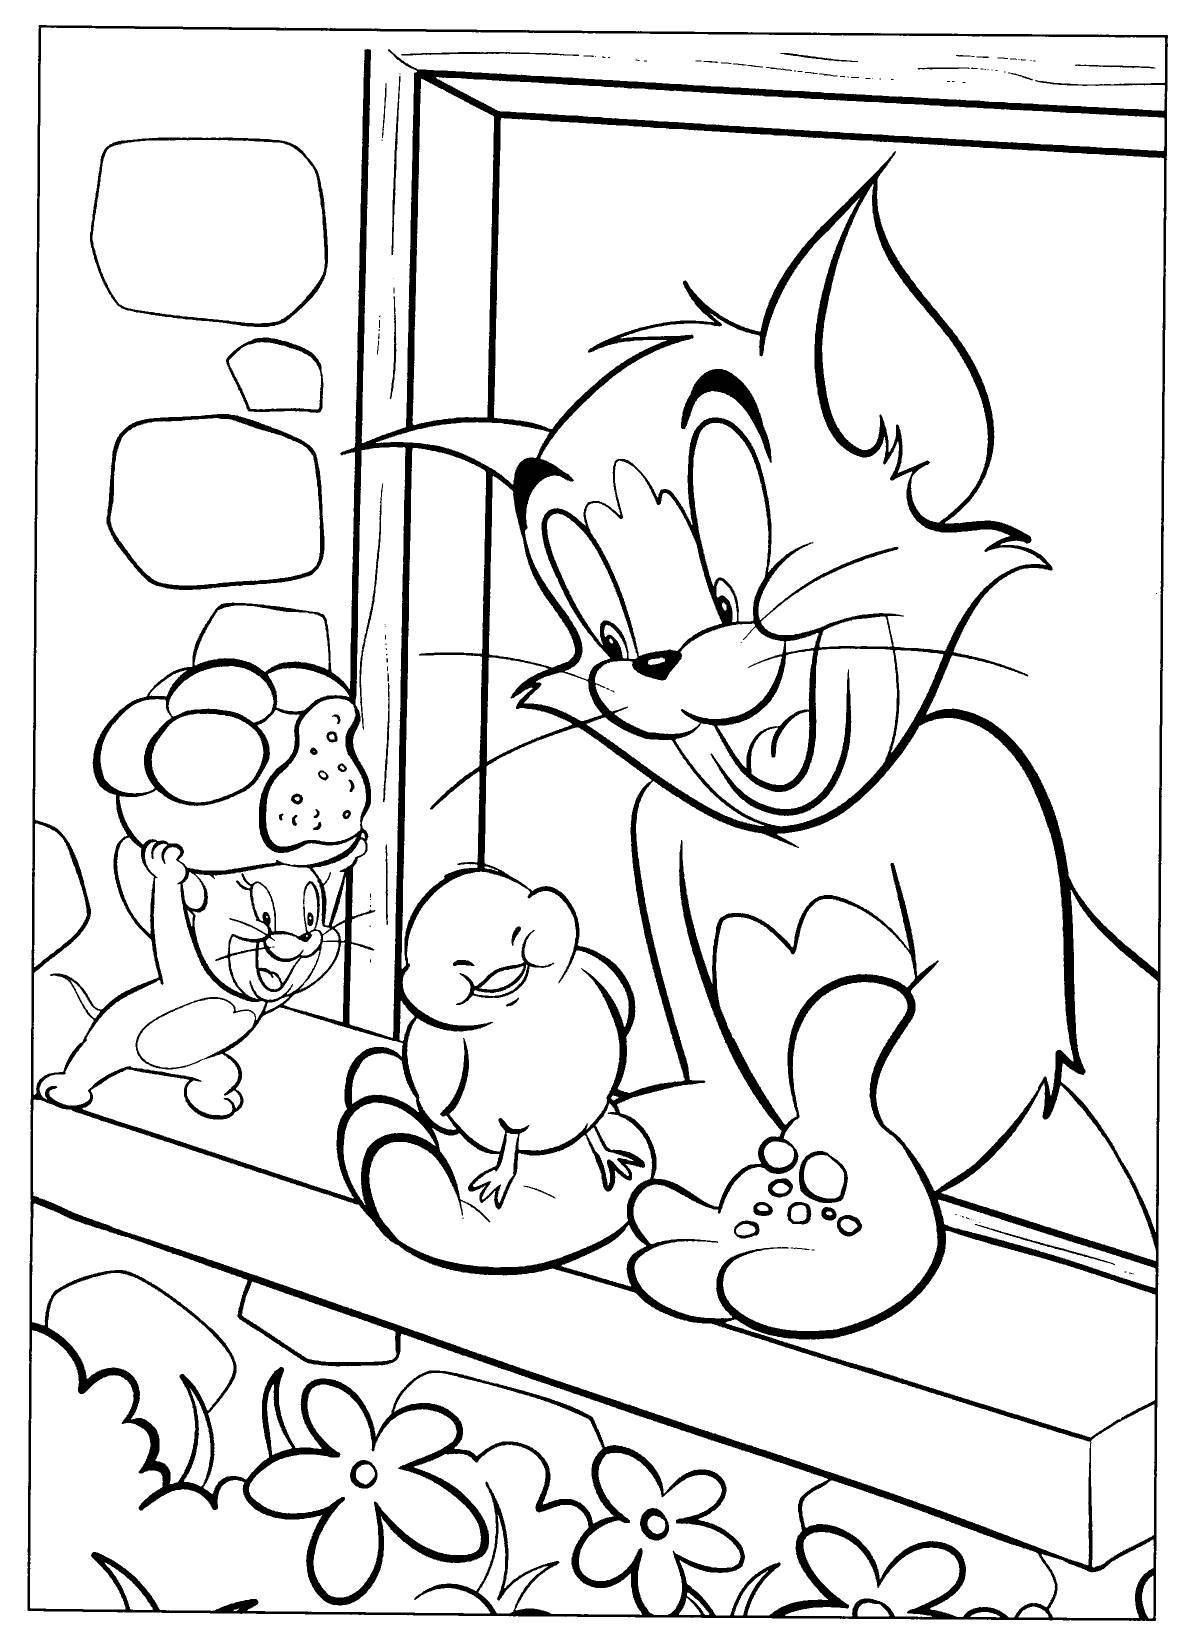 Cute tom and jerry coloring pages for kids